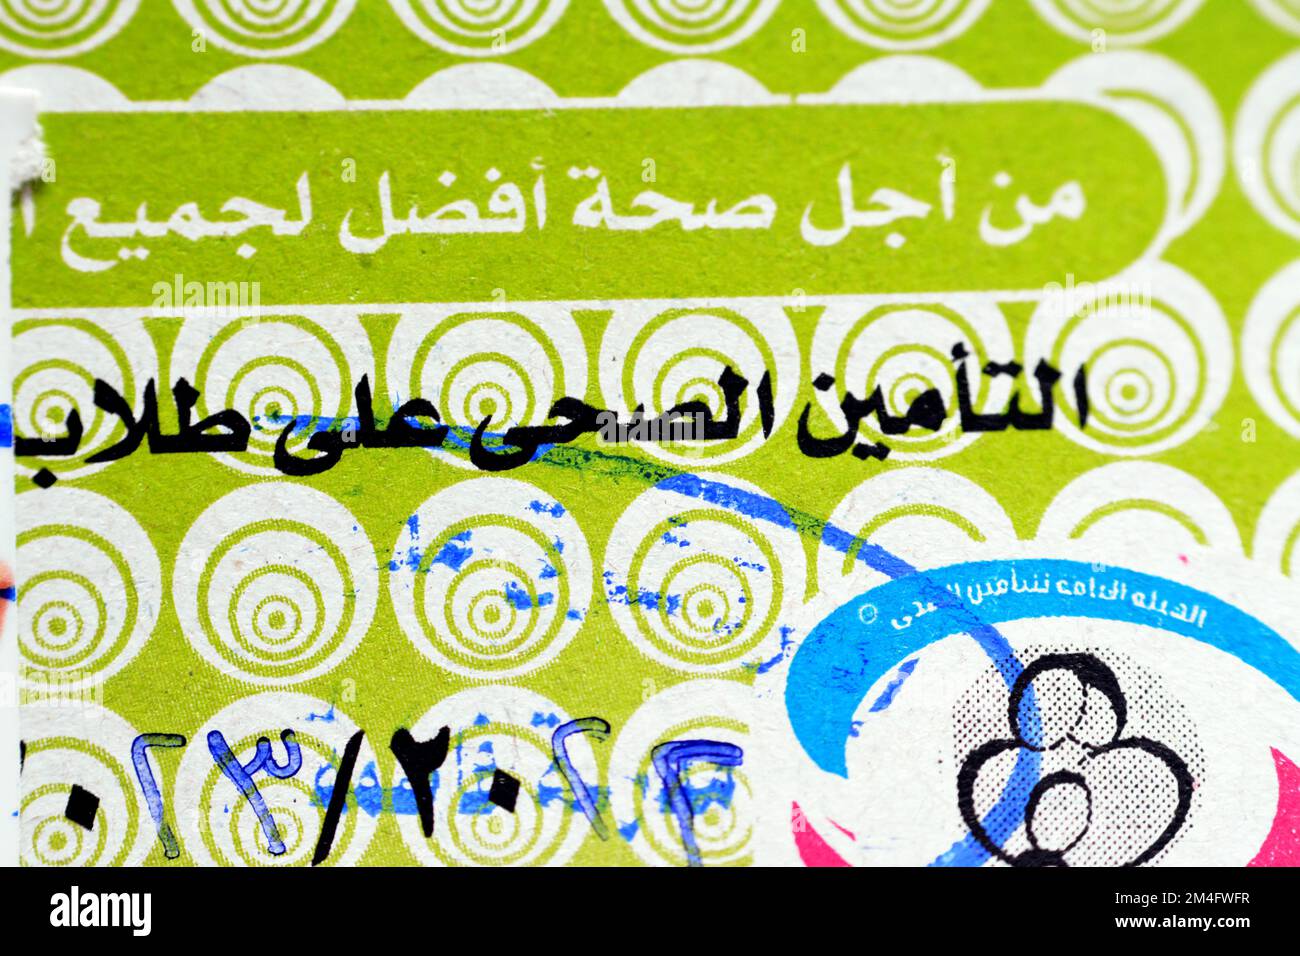 The Egyptian health insurance card of school students in Egypt, Translation of Arabic text ( The general health insurance of school students ), a soci Stock Photo